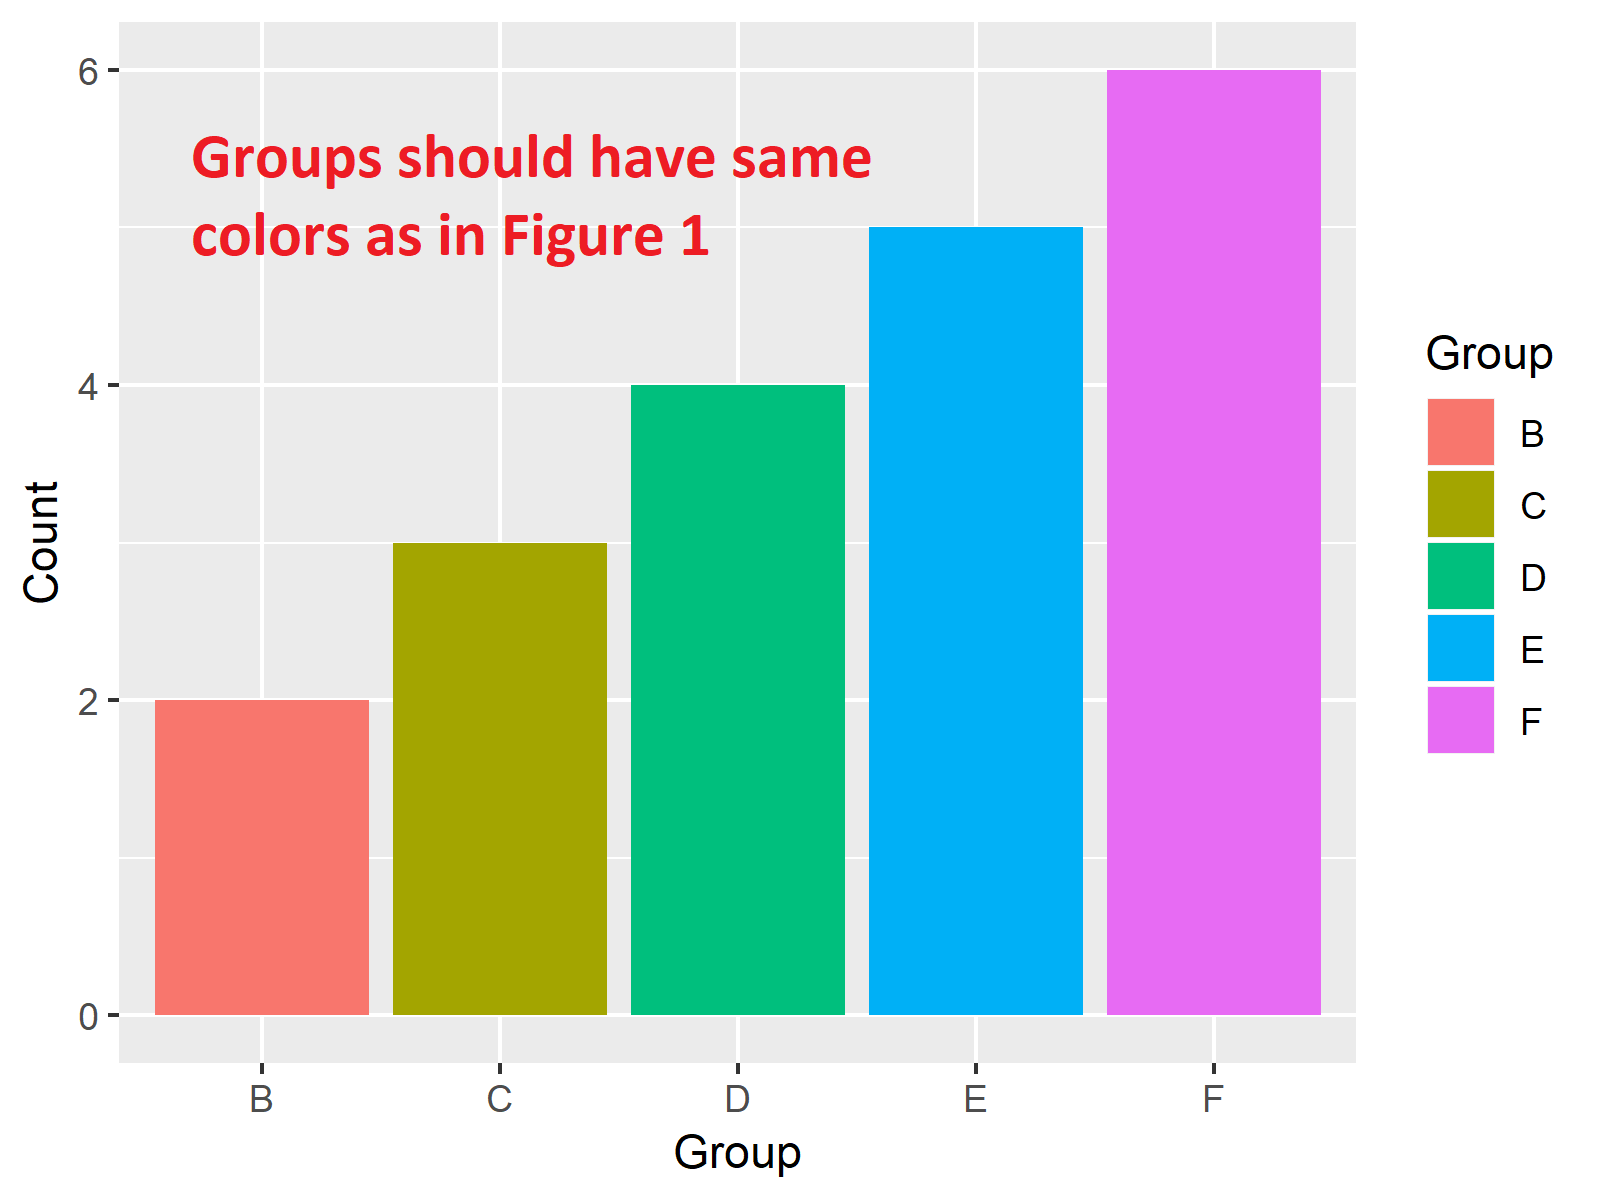 ggplot2 barchart with wrong colors